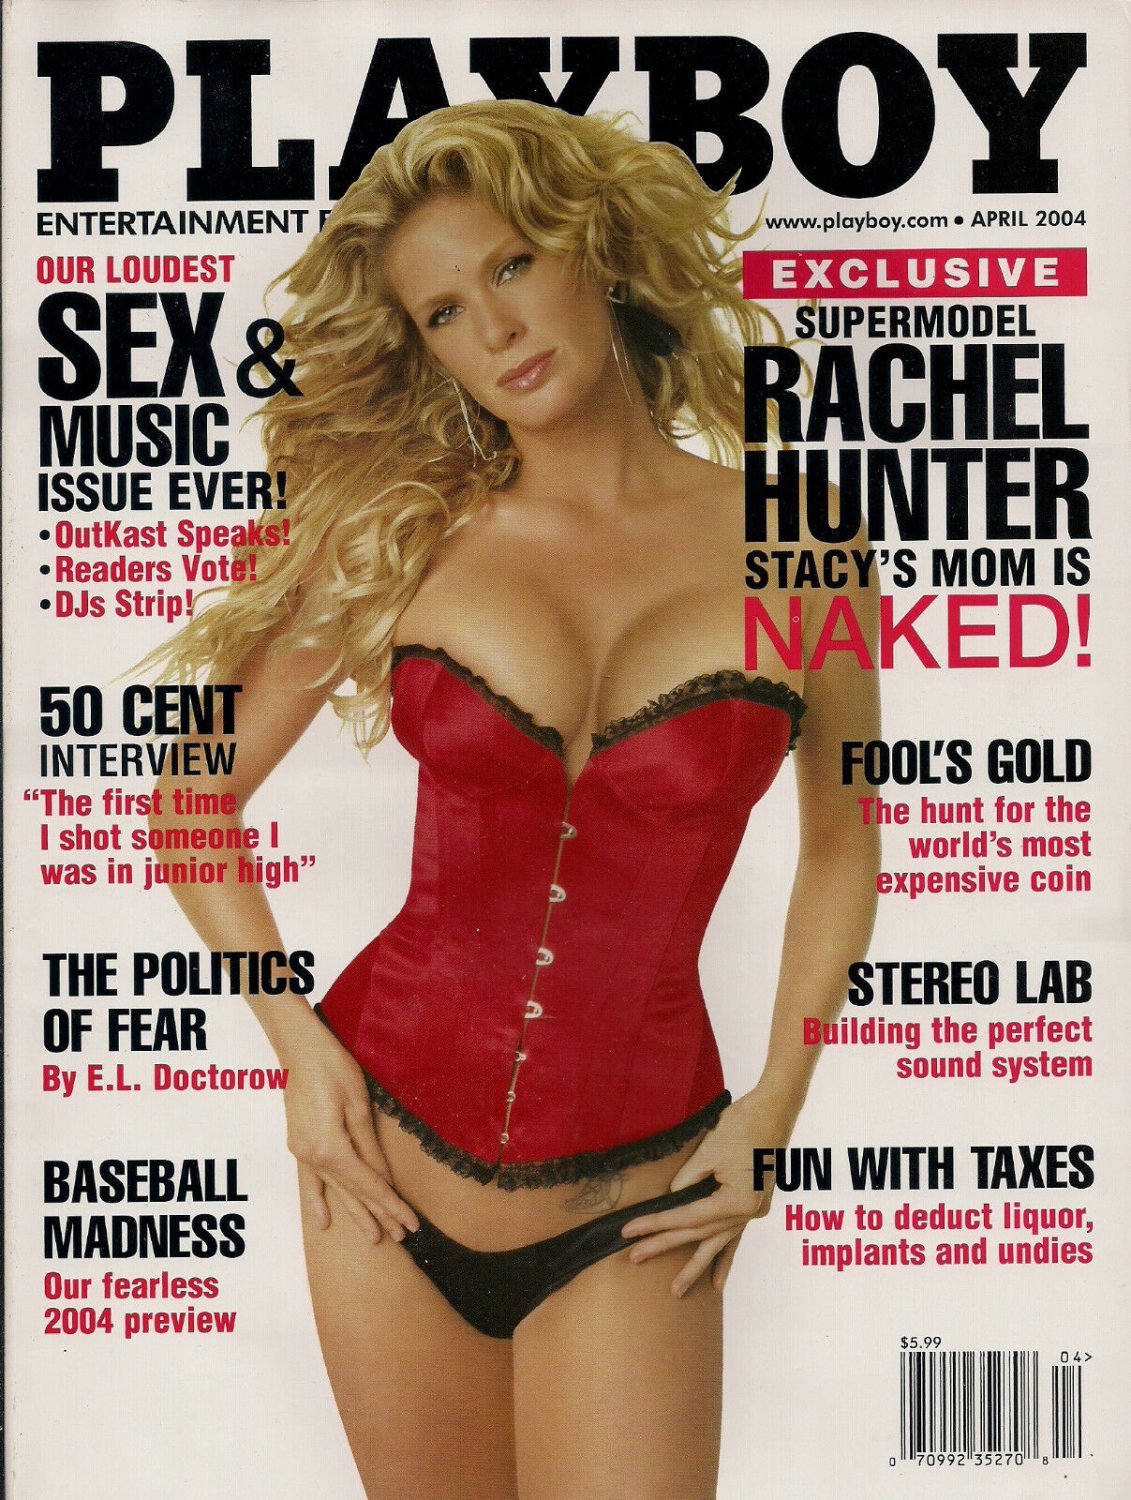 GREETING PLAYBOY COLLECTORS!!!UP FOR product IS:APRIL 2004 ISSUE OF PLAYBOY...